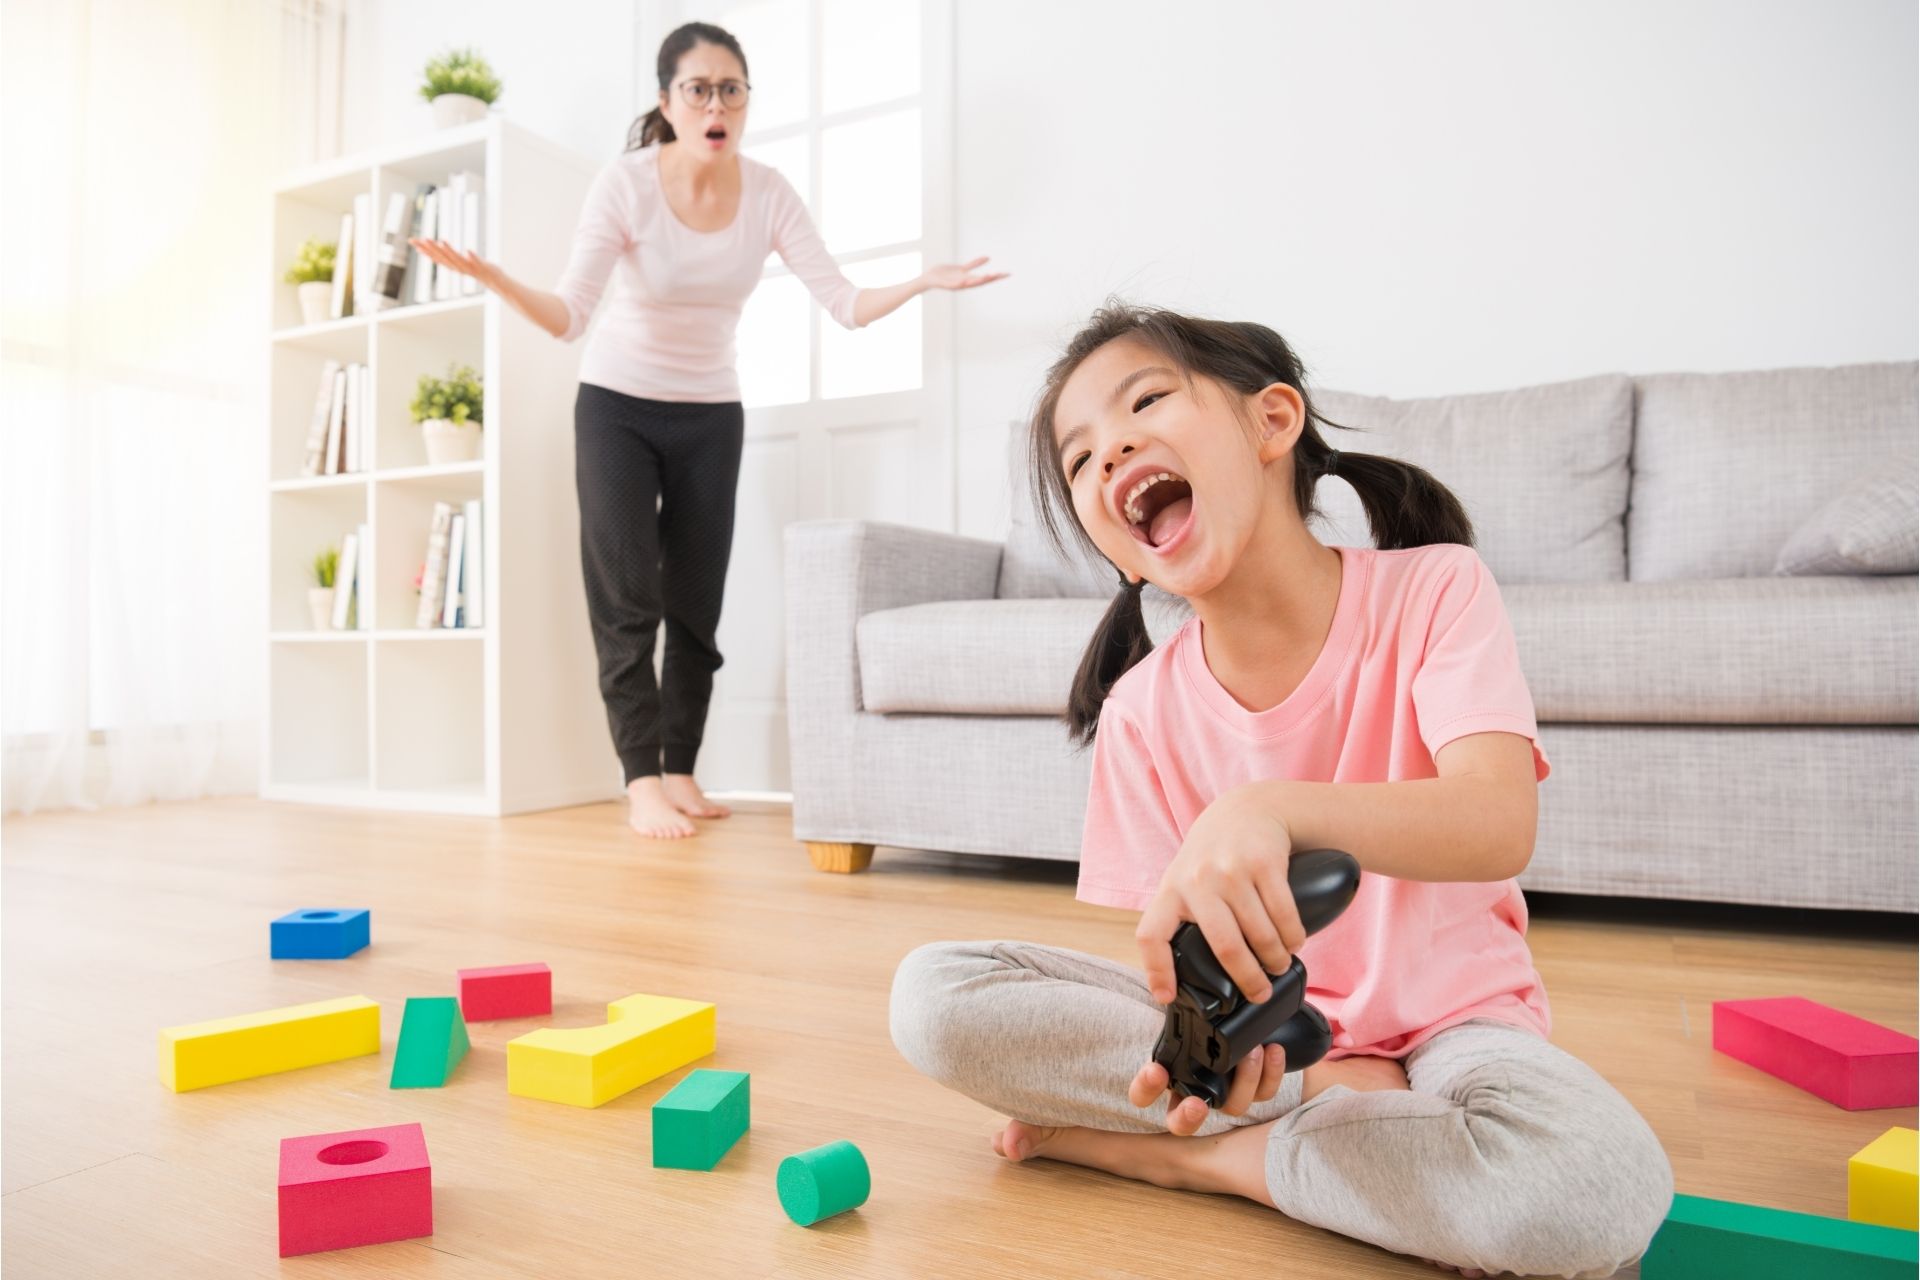 essential ways To Calm Your Kids Without Yelling